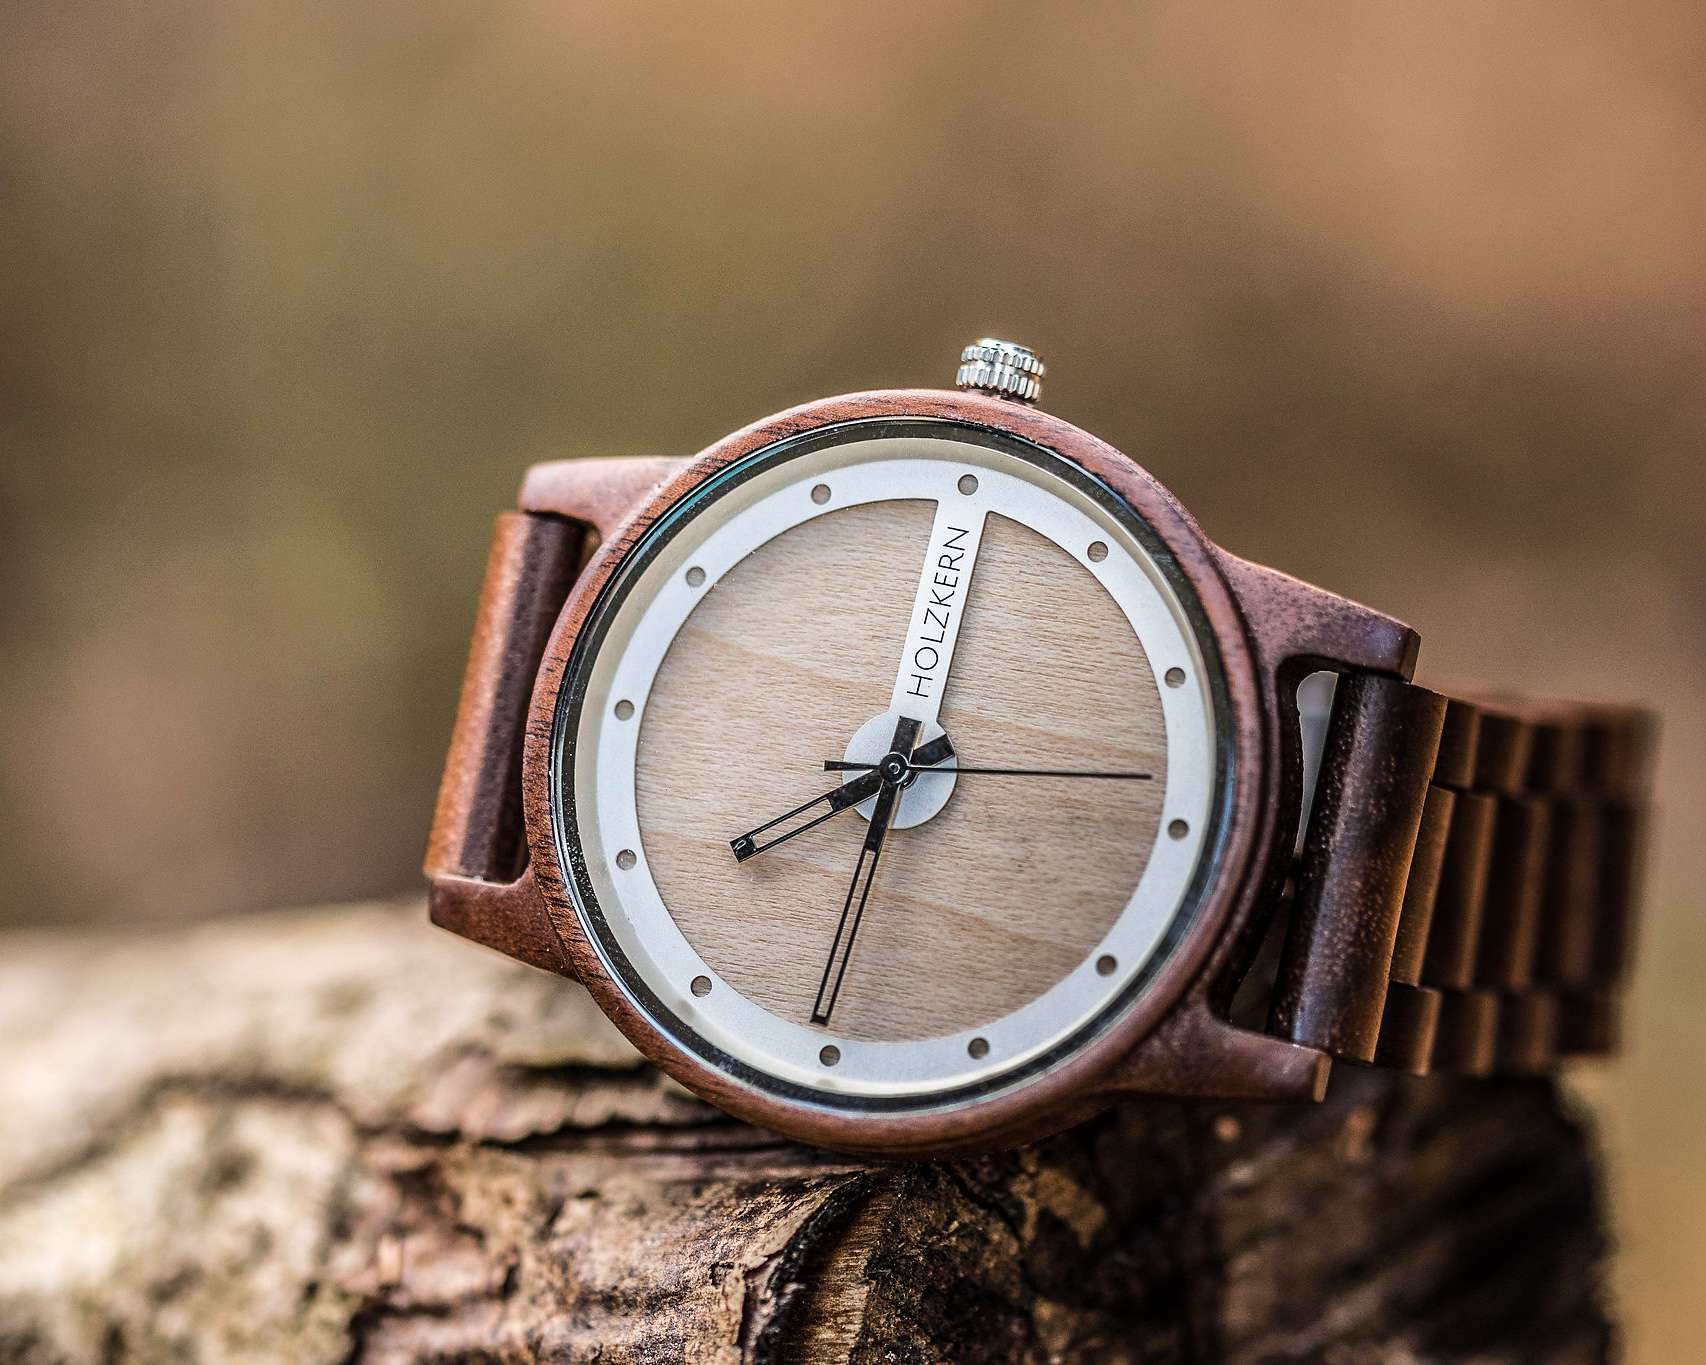 Taboola Ad Example 62213 - Handcrafted: What Makes These Watches Made Of Wood And Stone So Unique?